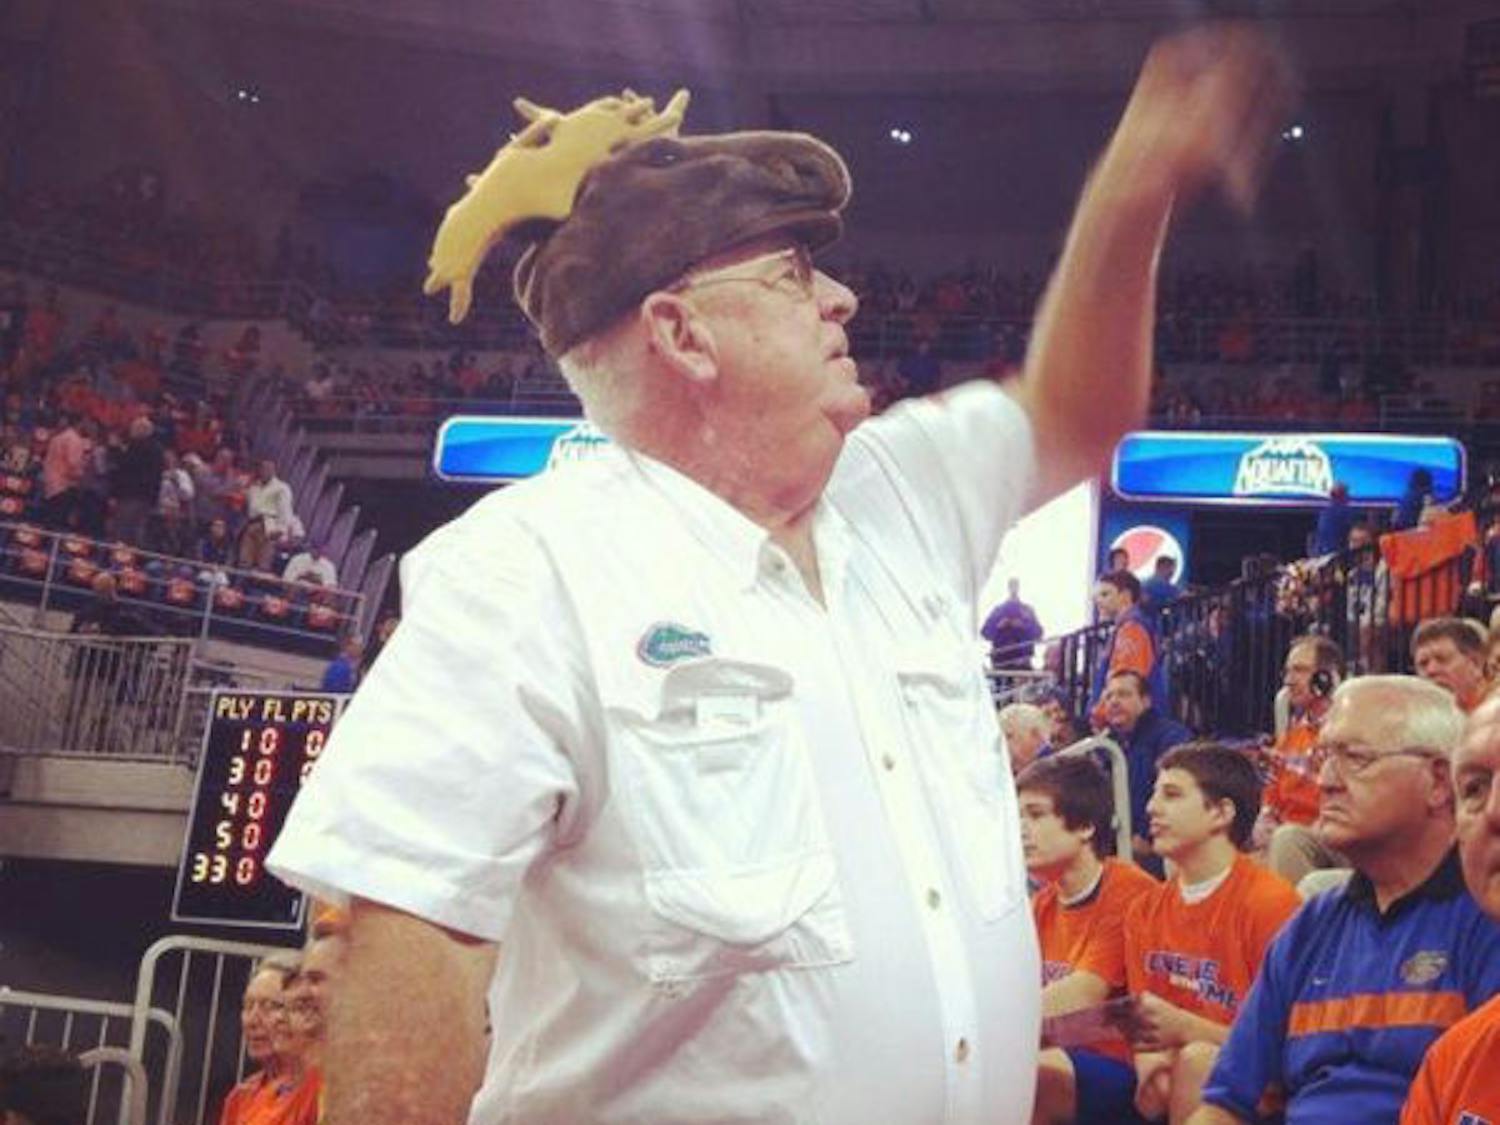 Ron Davis has been attending Florida basketball games since his days as a student in the early 1960s. In 1988, he adopted a routine involving a green Speedo and a moose hat in an attempt to distract opposing free-throw shooters.&nbsp;